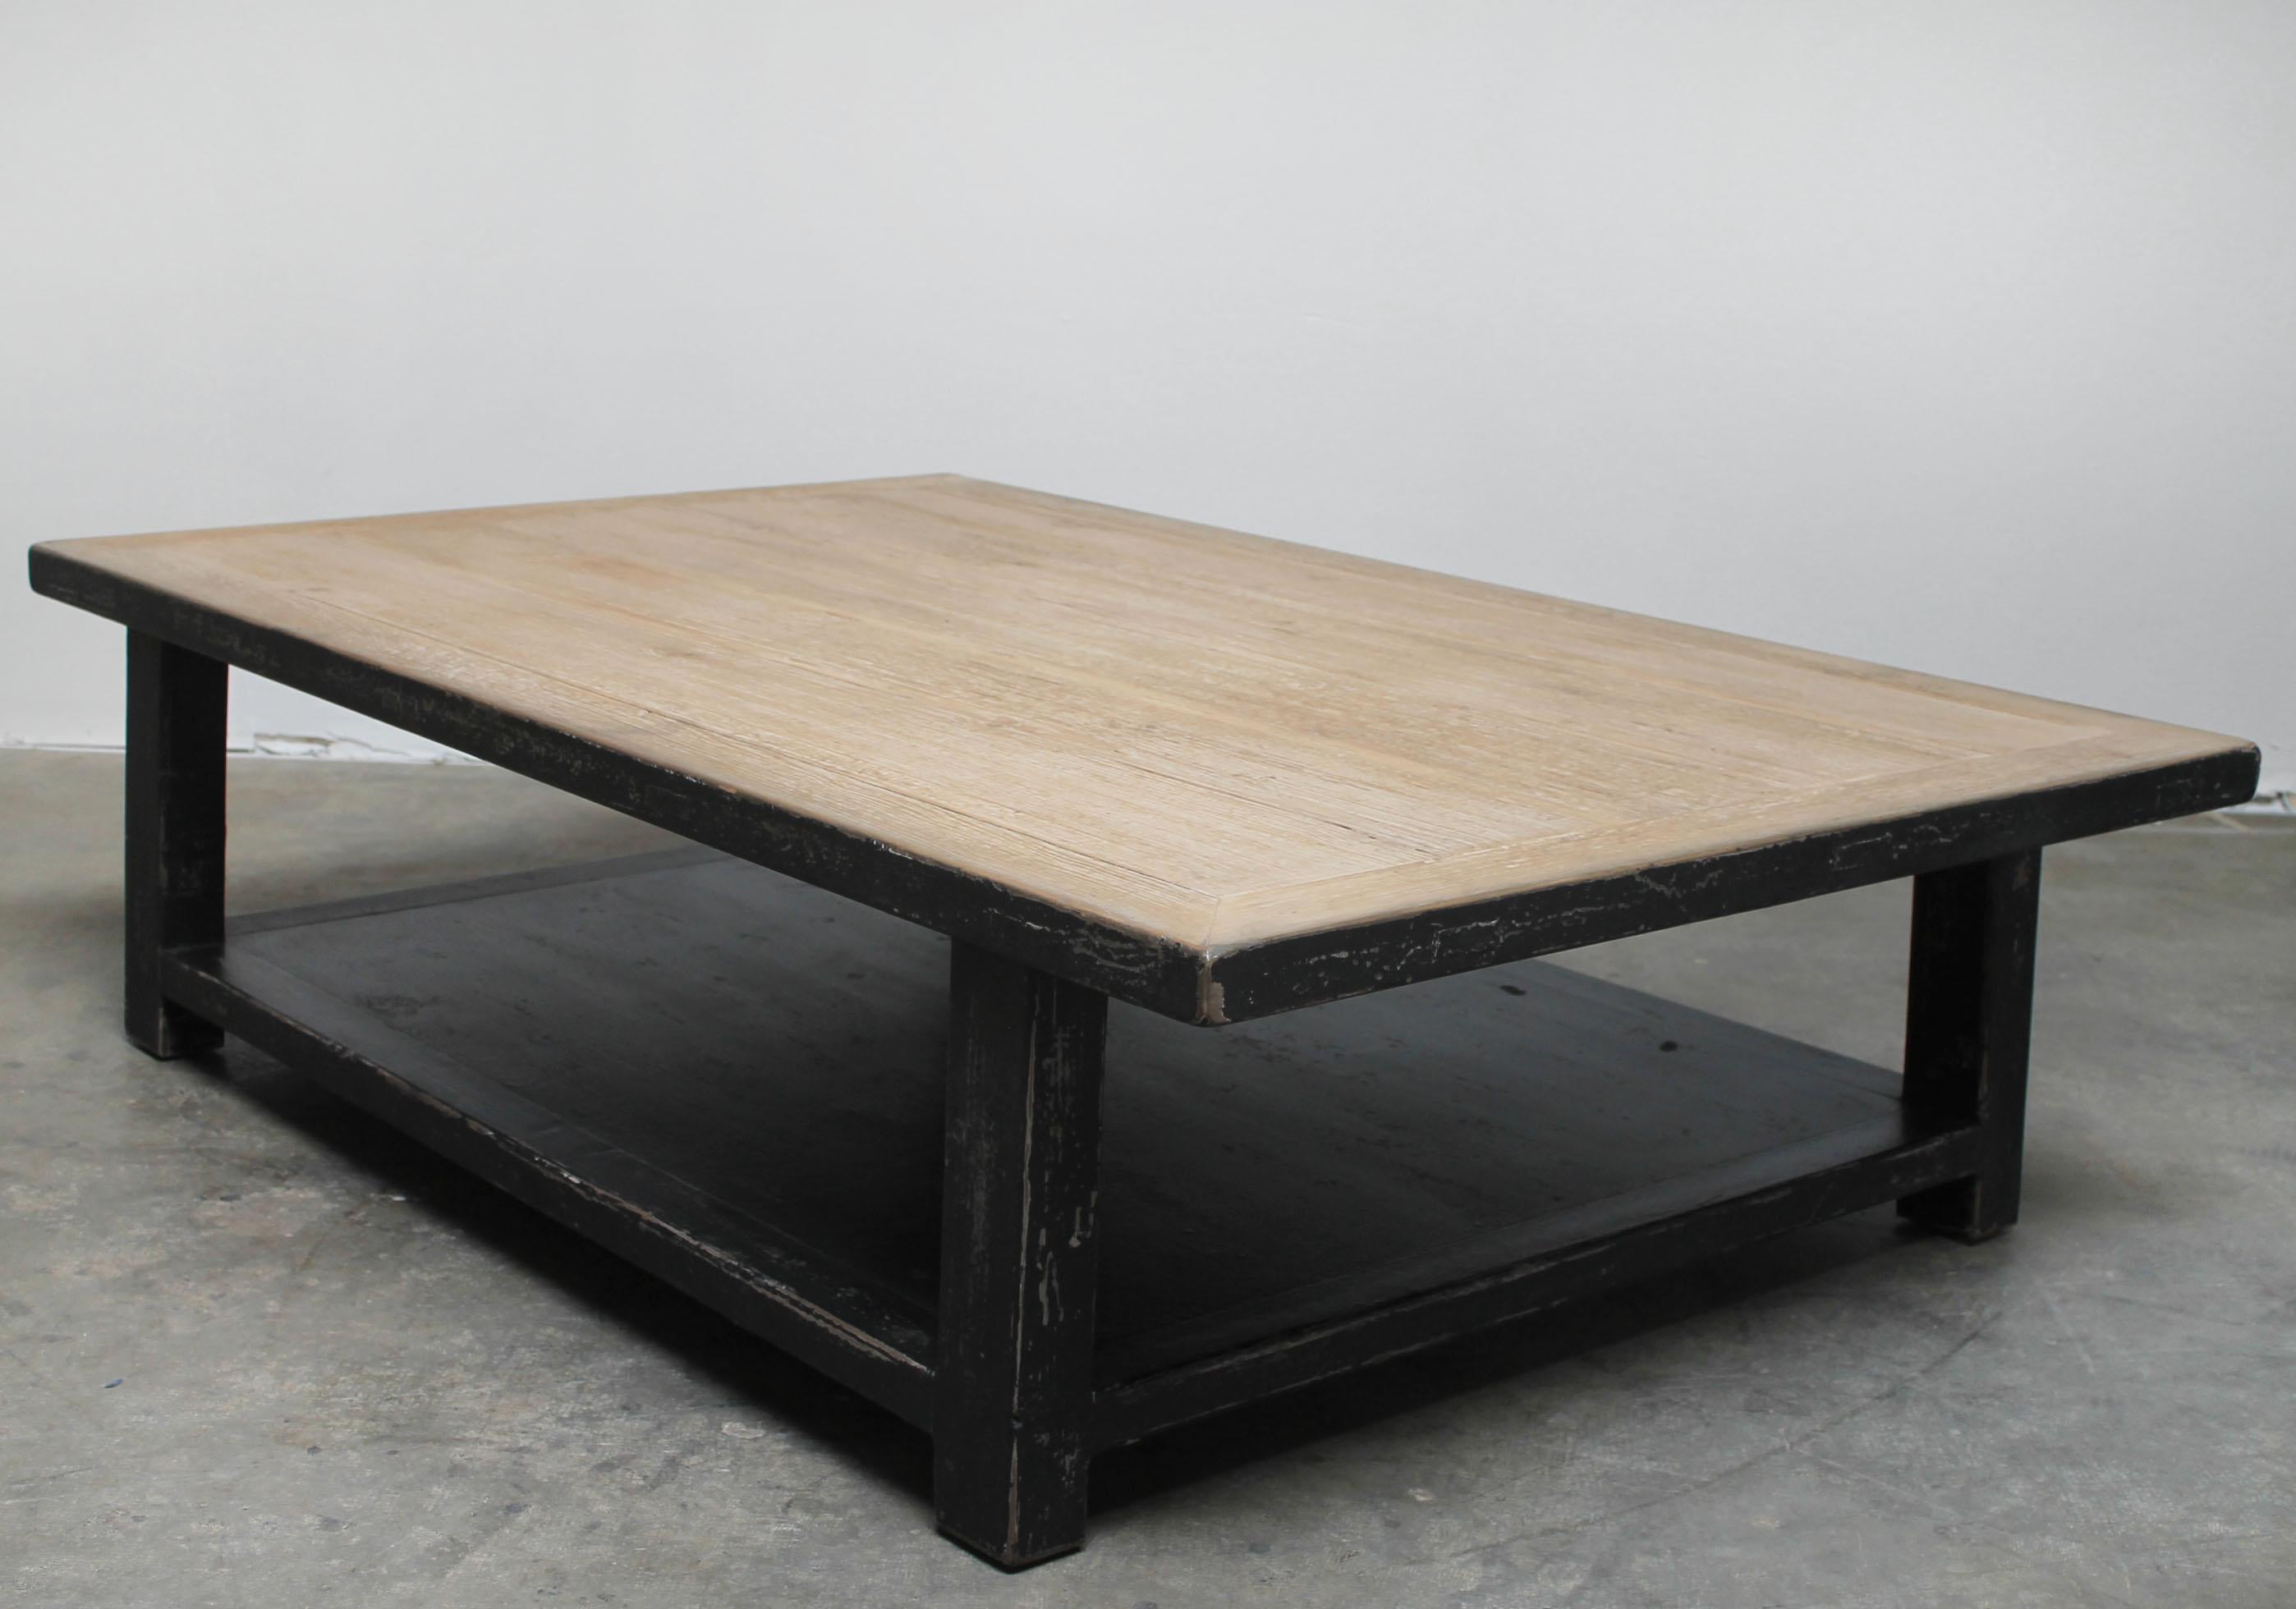 Large Reclaimed Pine Wood Coffee Table with Distressed Black Finish 2